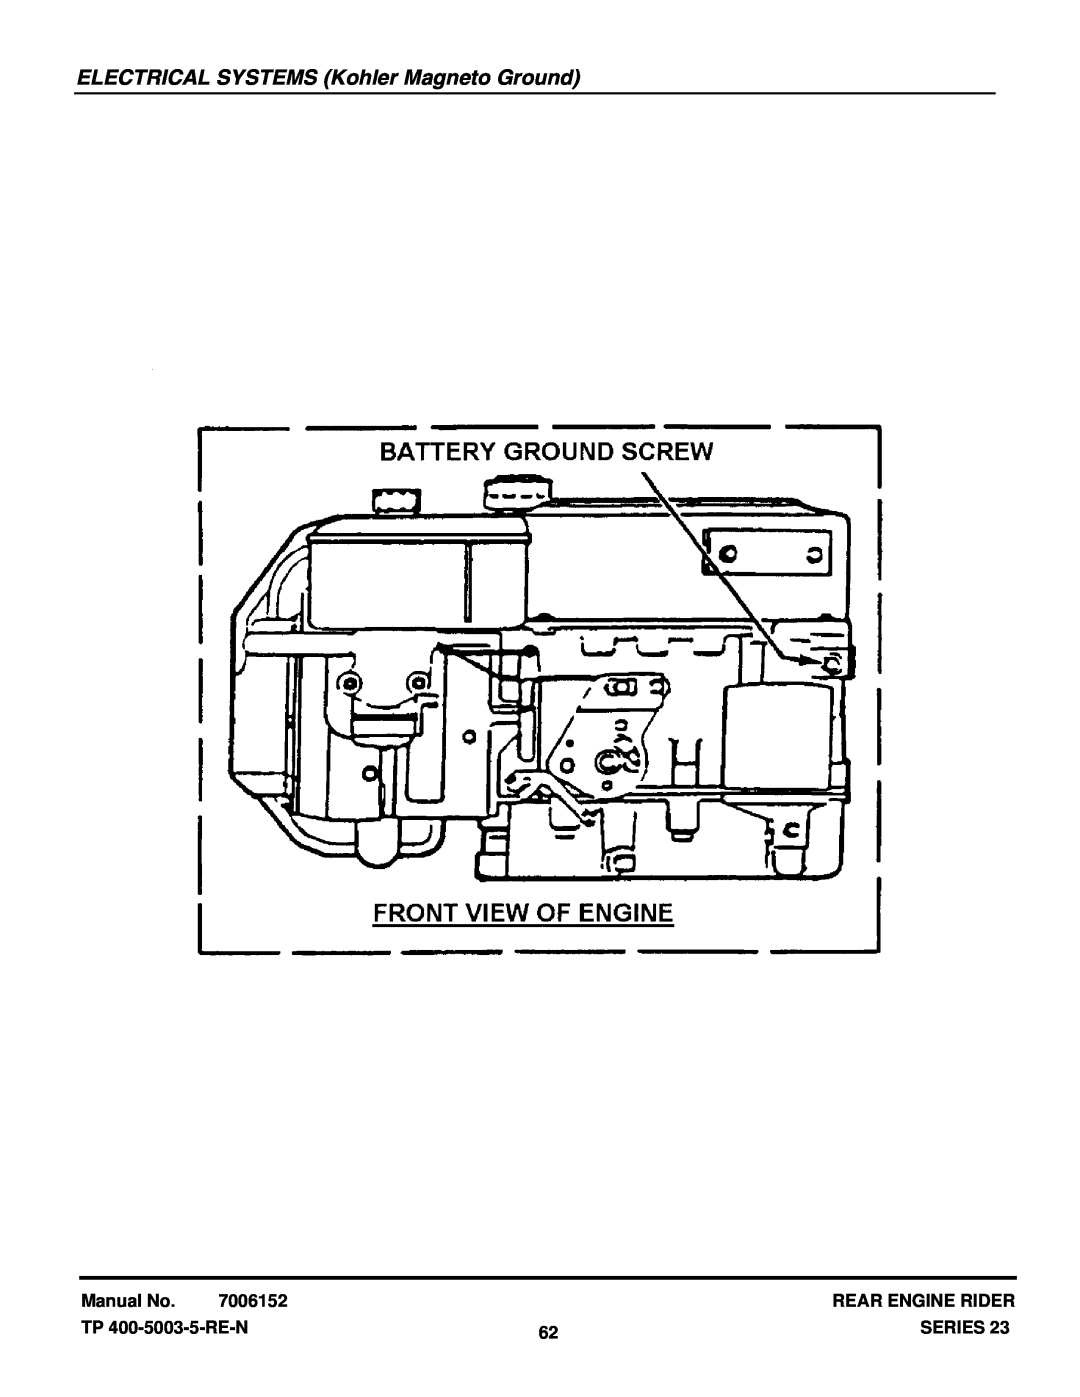 Snapper 281023BVE ELECTRICAL SYSTEMS Kohler Magneto Ground, Manual No, 7006152, Rear Engine Rider, TP 400-5003-5-RE-N 